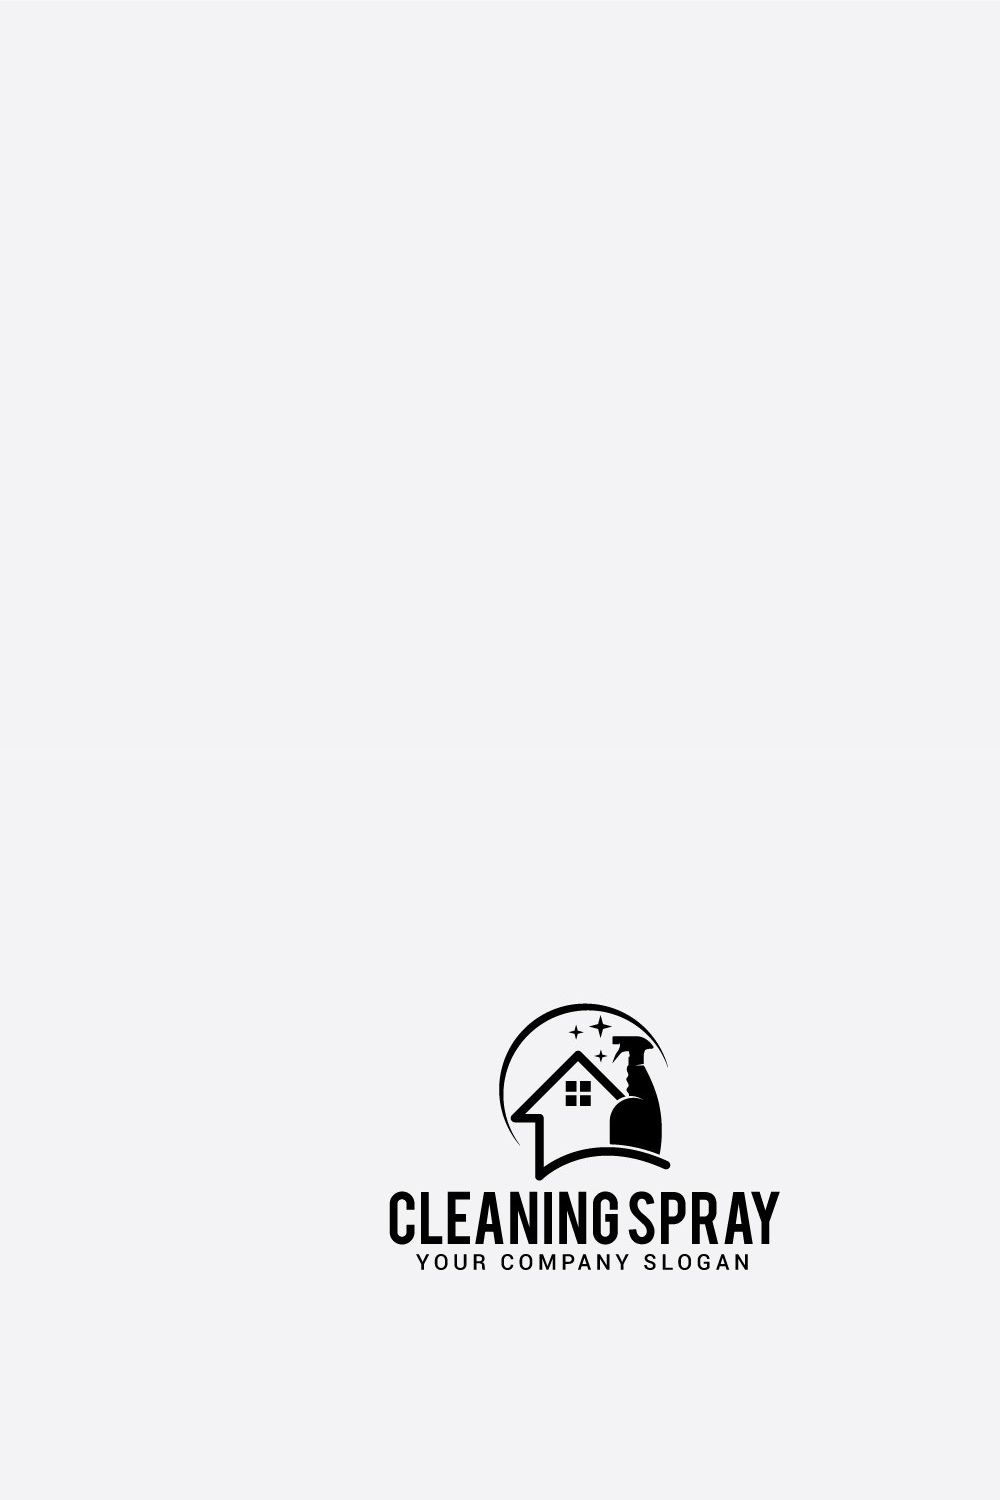 cleaning spray logo pinterest preview image.